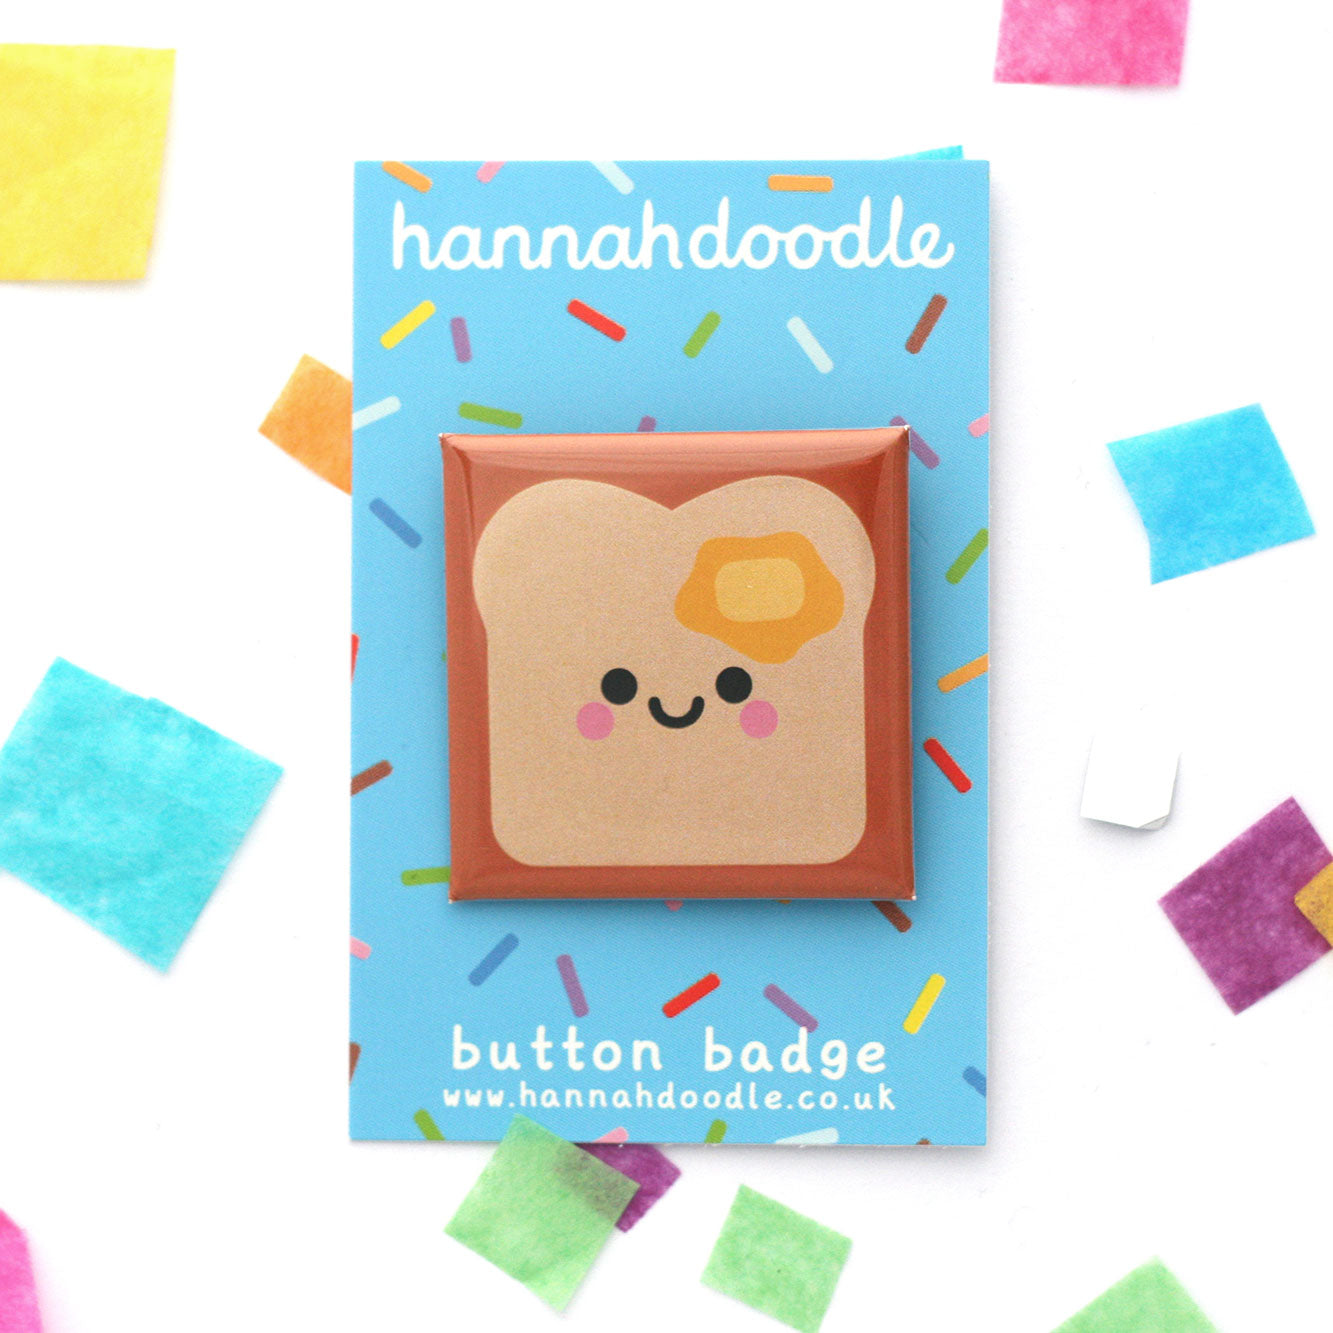 Buttered toast 38mm square button badge attached to blue hannahdoodle backing card